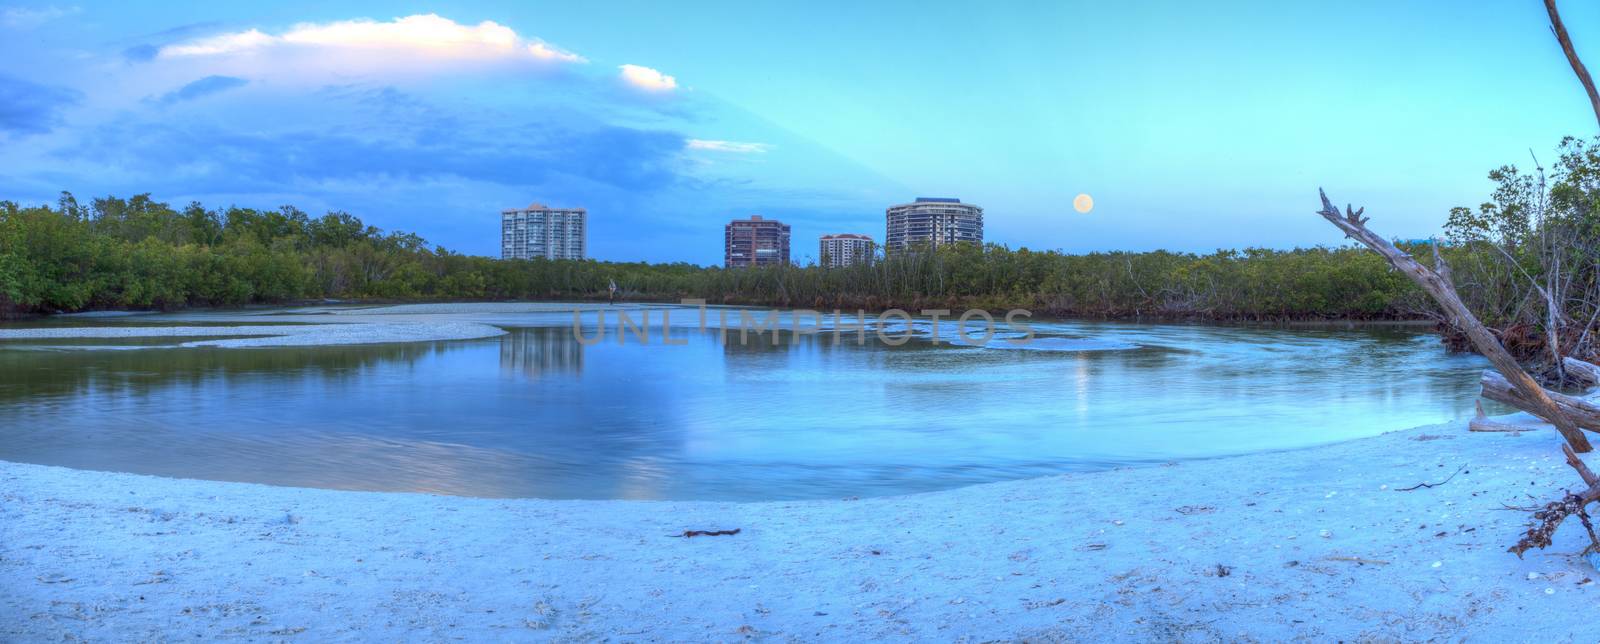 Moonrise over River leading to the ocean at Clam Pass by steffstarr